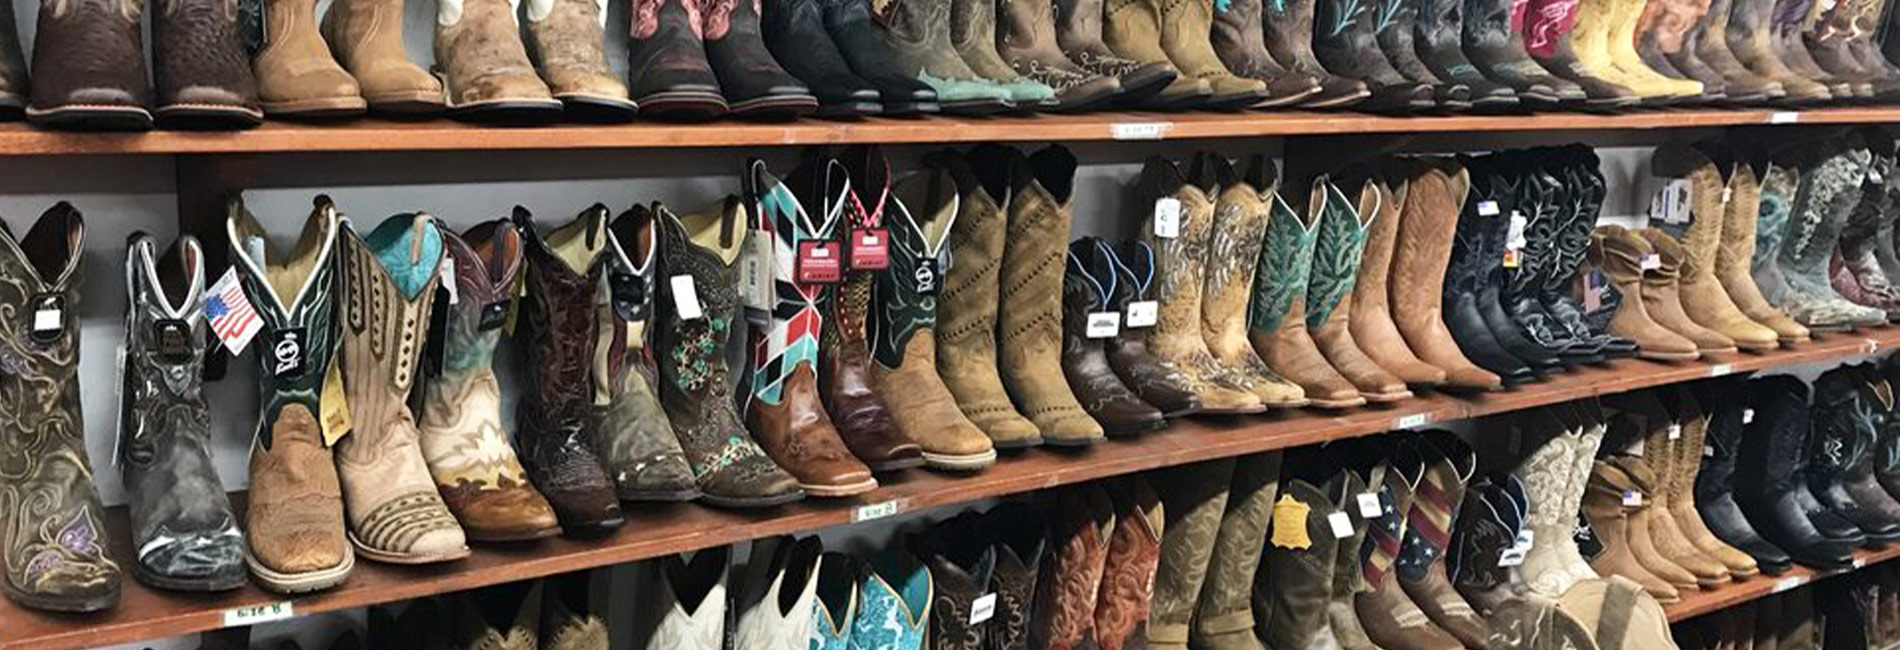 cowboy boot stores near me